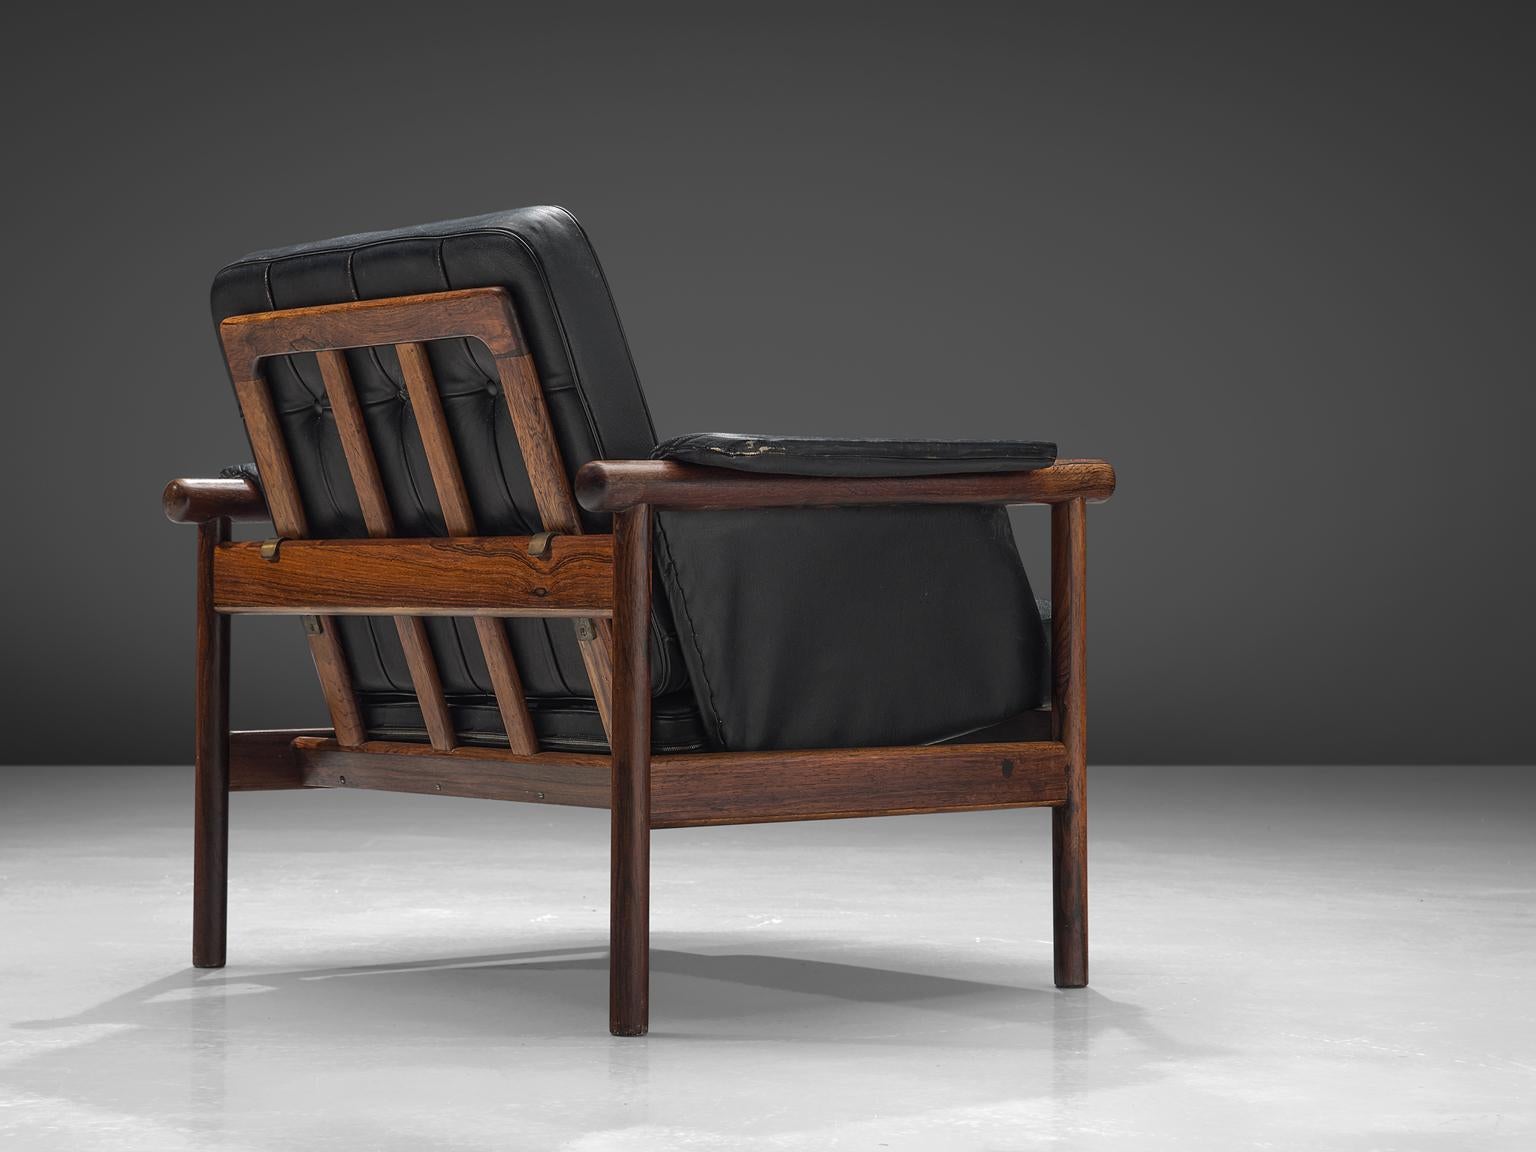 Illum Wikkelsø, easy chair, black leather and rosewood, Denmark, 1960s.

This lounge chair features a rosewood frame with slatted back and an angular, geometric frame. The tufted seat and back are comfortable and support the sitter. The backrest is